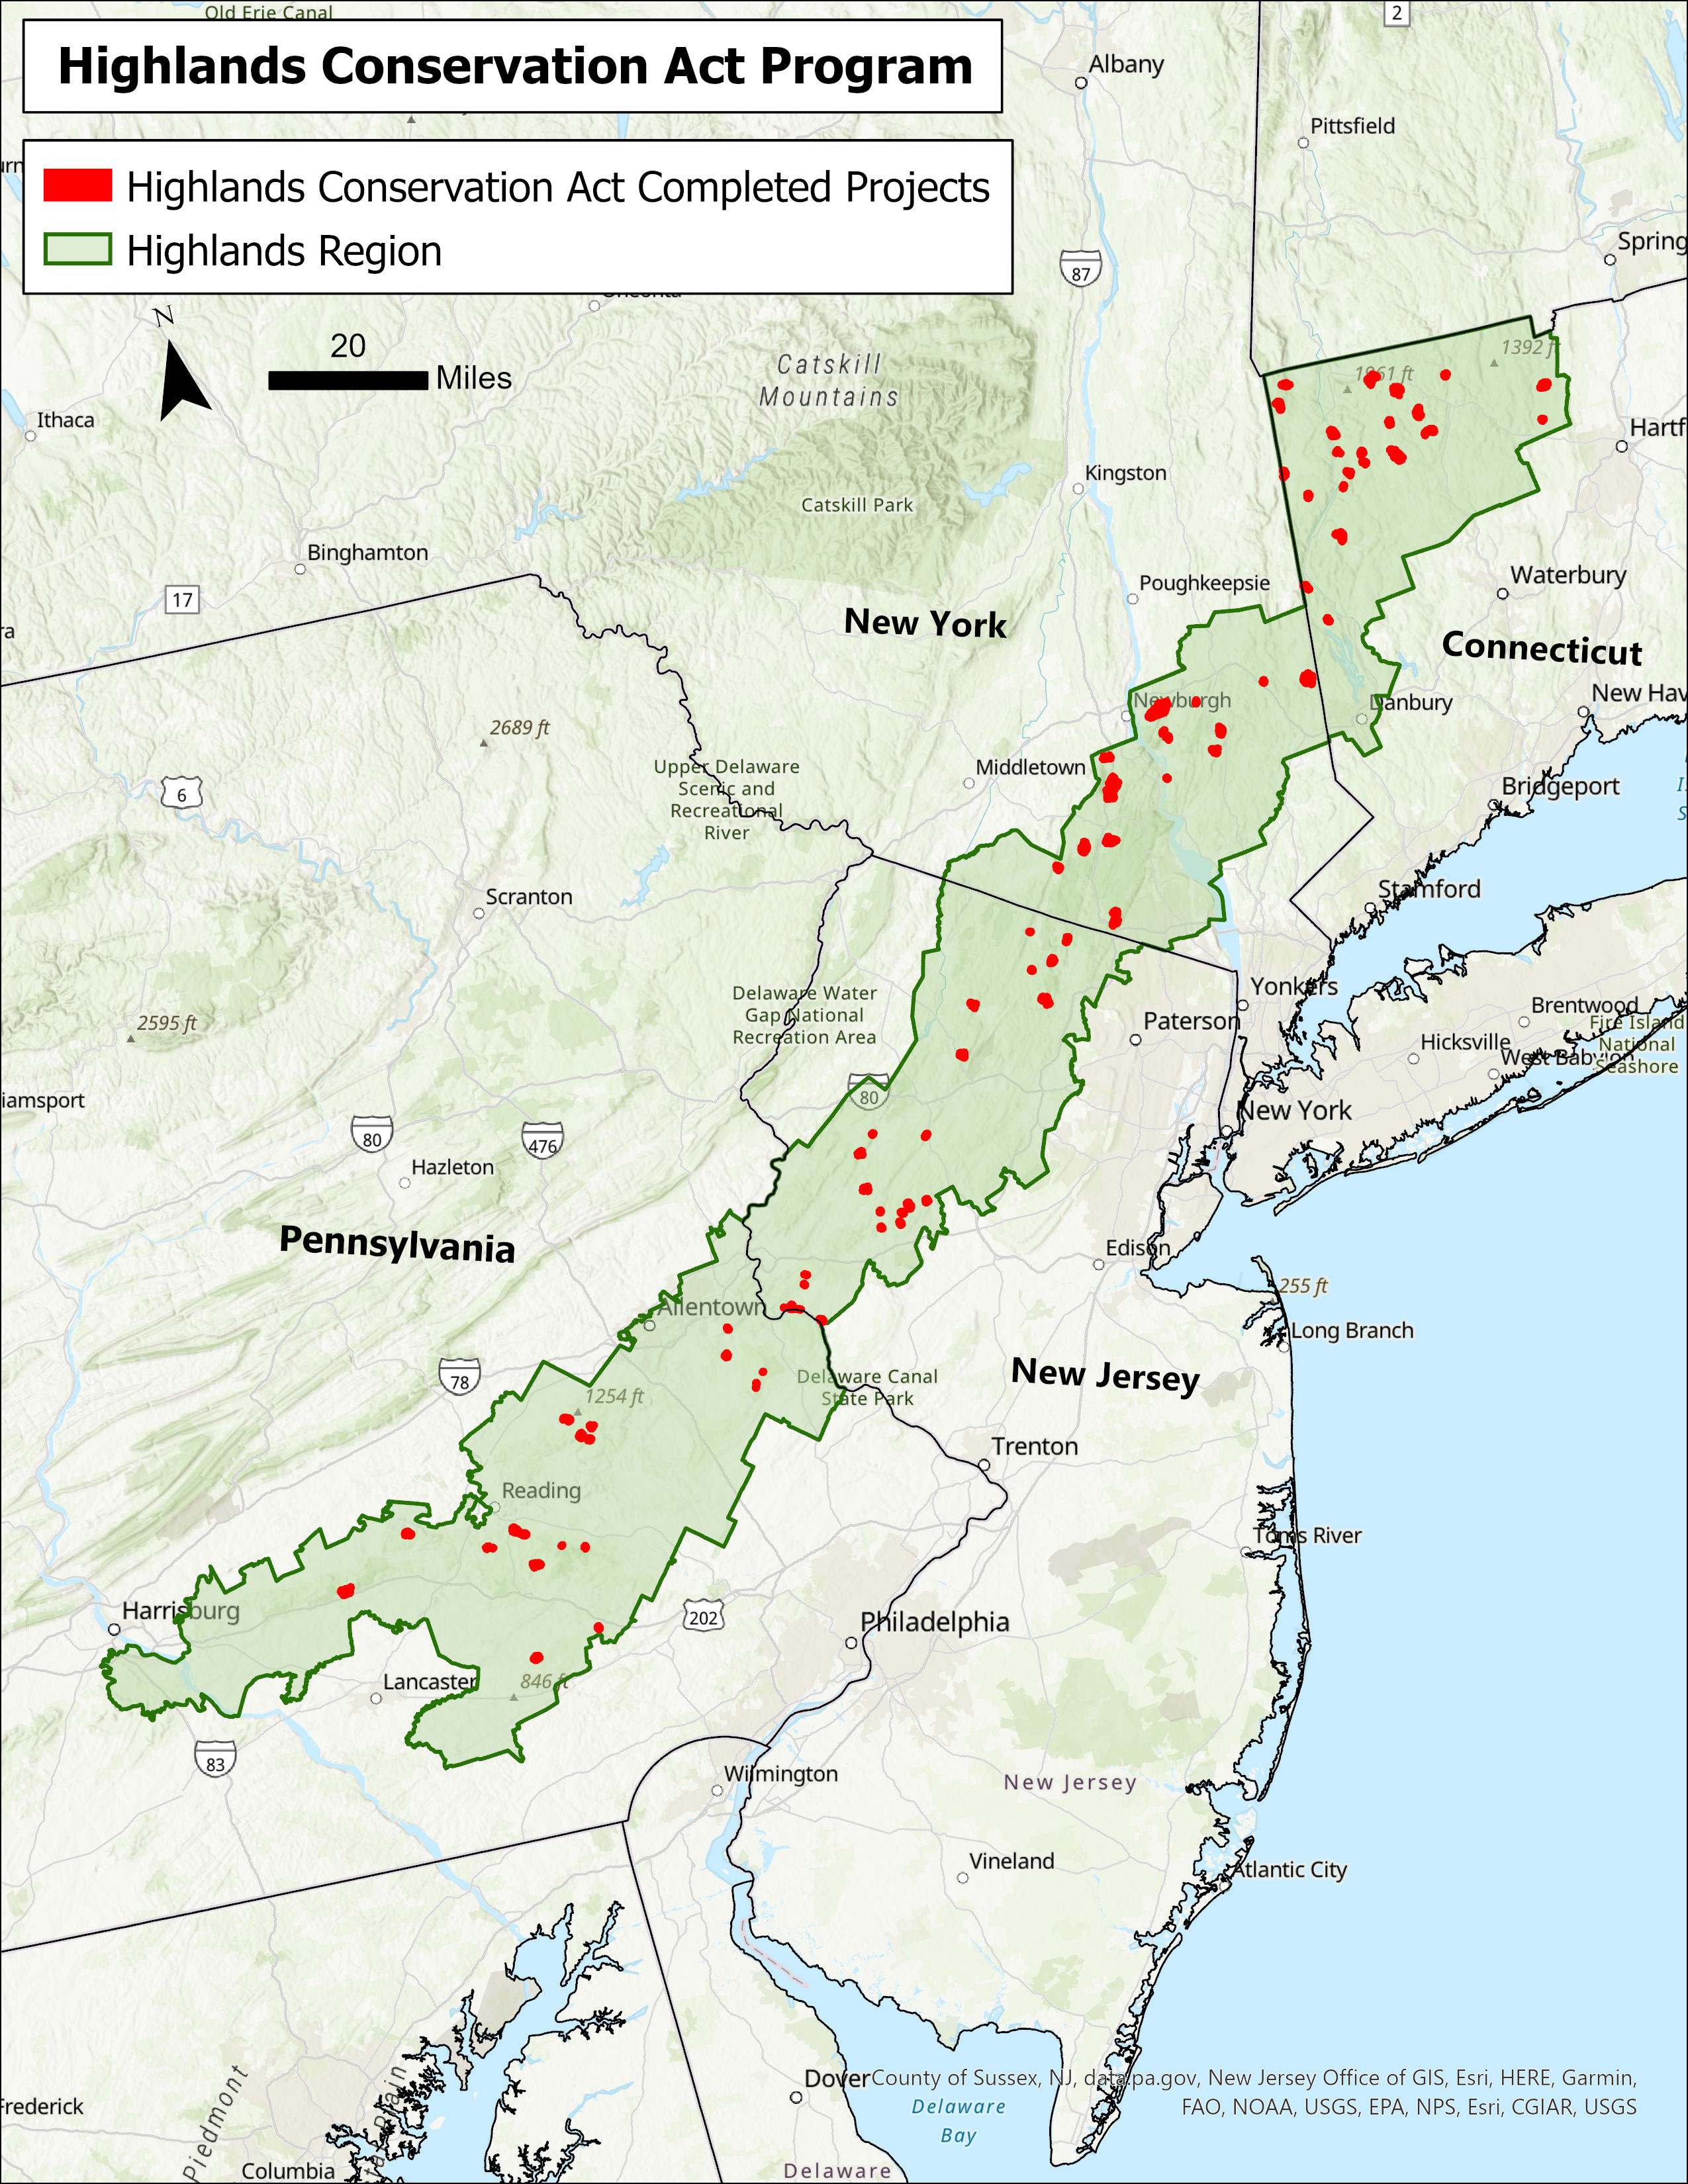 An overhead view of the four state Highlands region shows that several properties have been protected across north-western Connecticut into New York, New Jersey and eastern Pennsylvania.